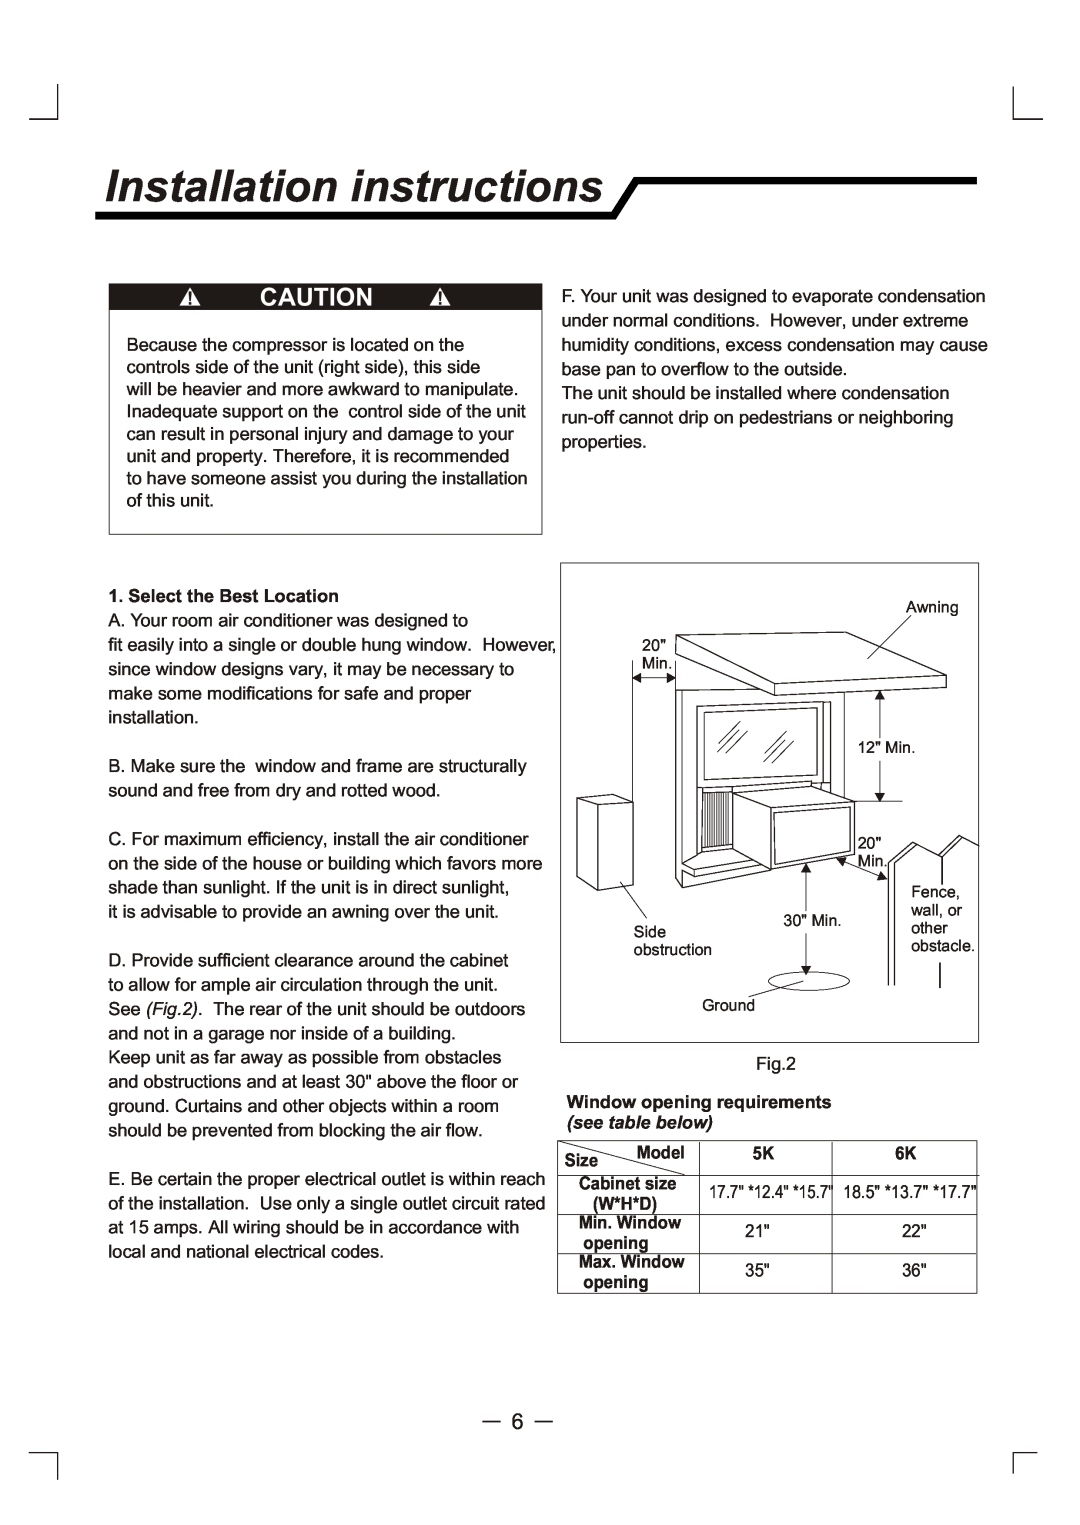 Admiral AAW-06CR1FHUE Installation instructions, Select the Best Location, Window opening requirements see table below 